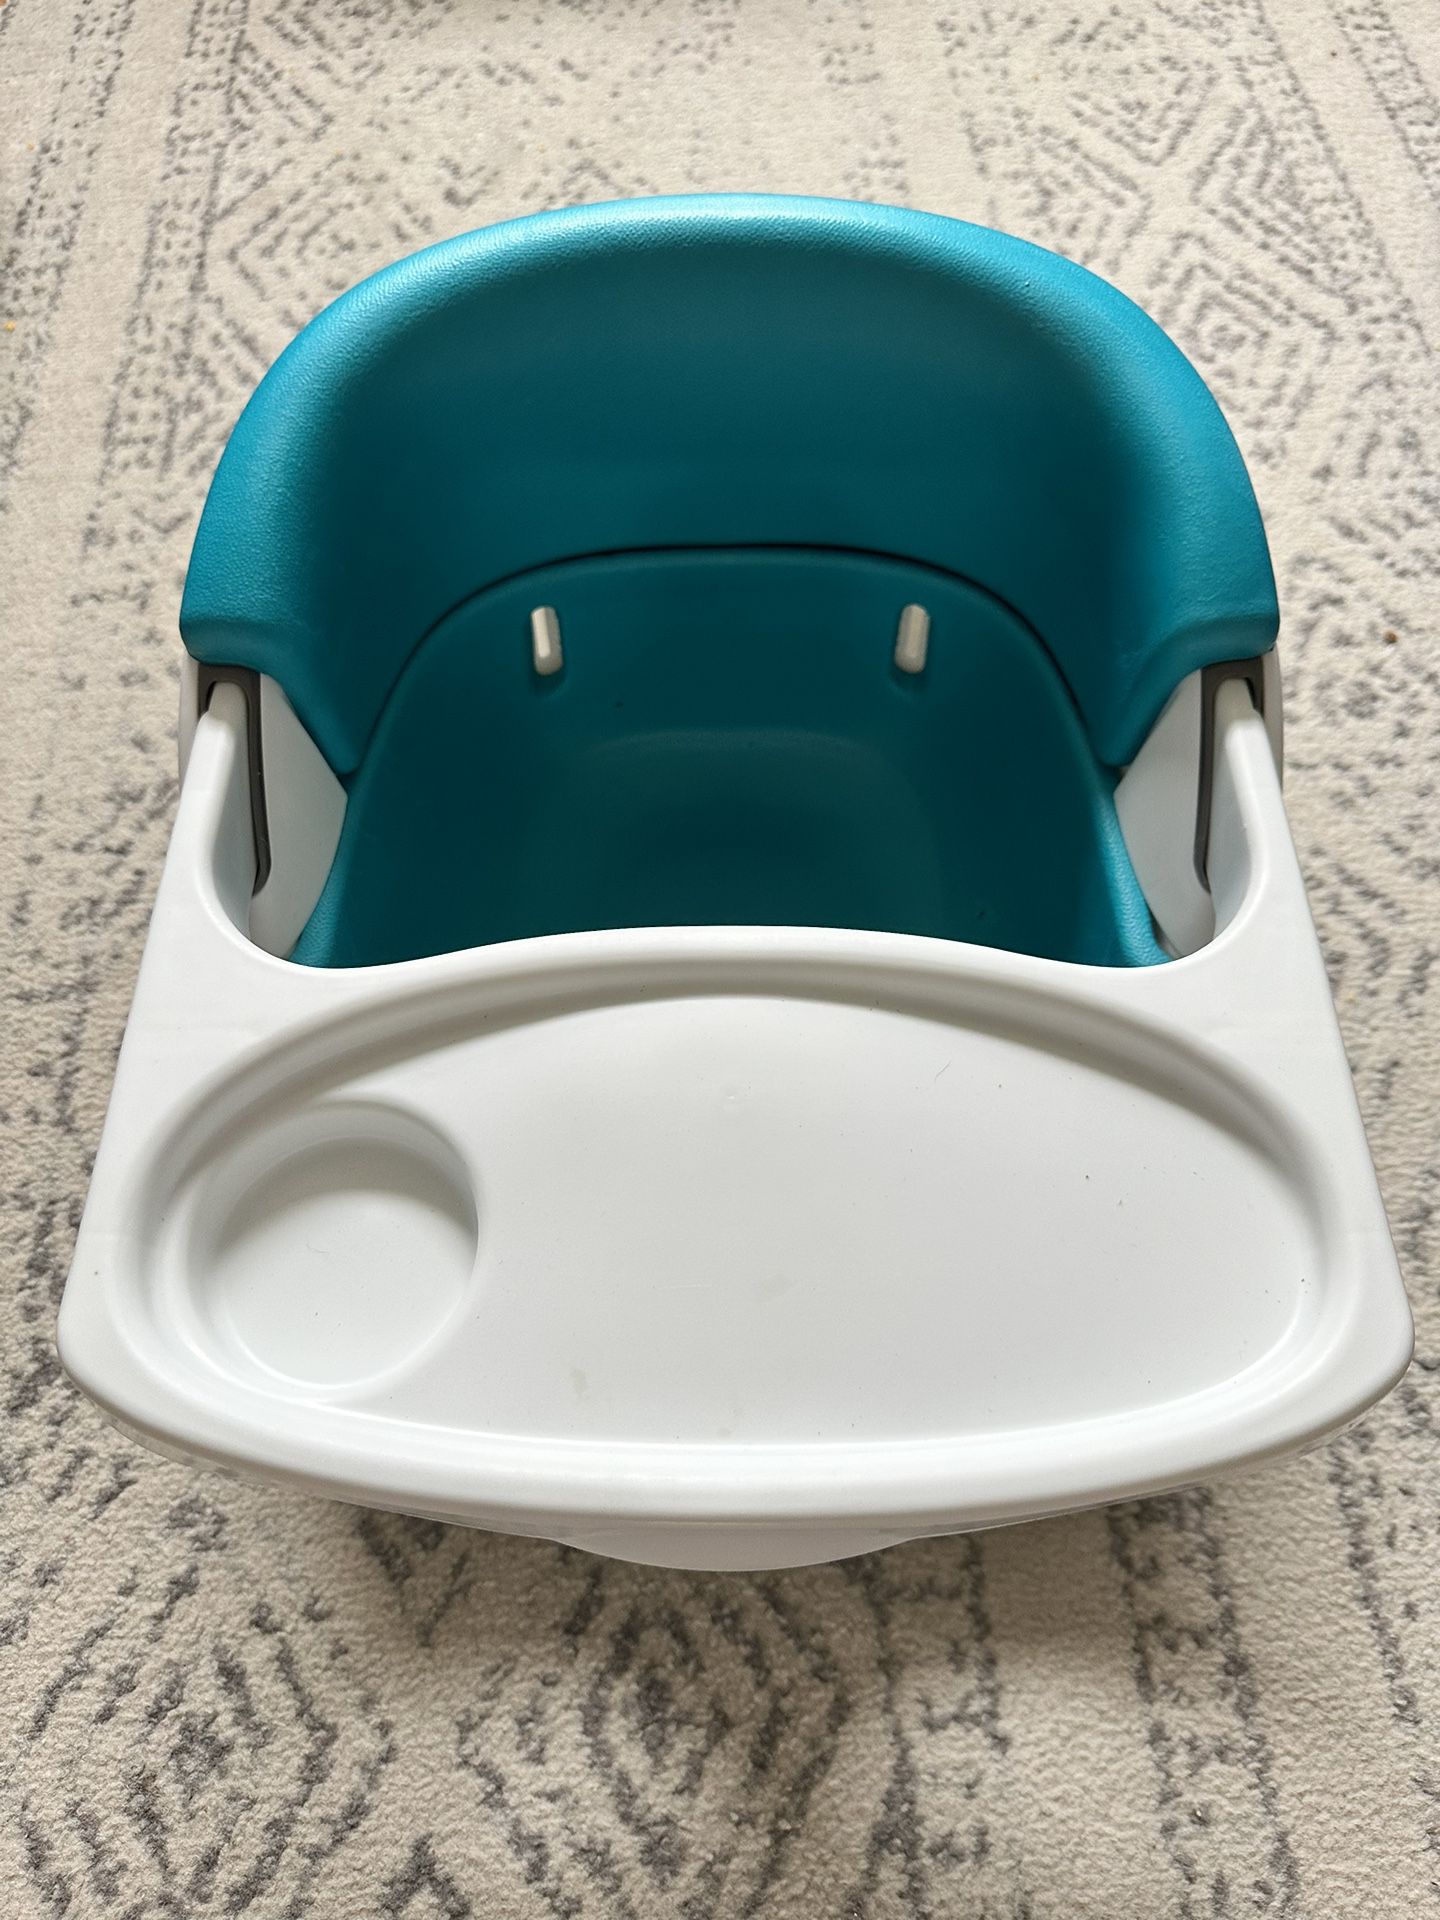 2 -n- 1 Baby booster Seat